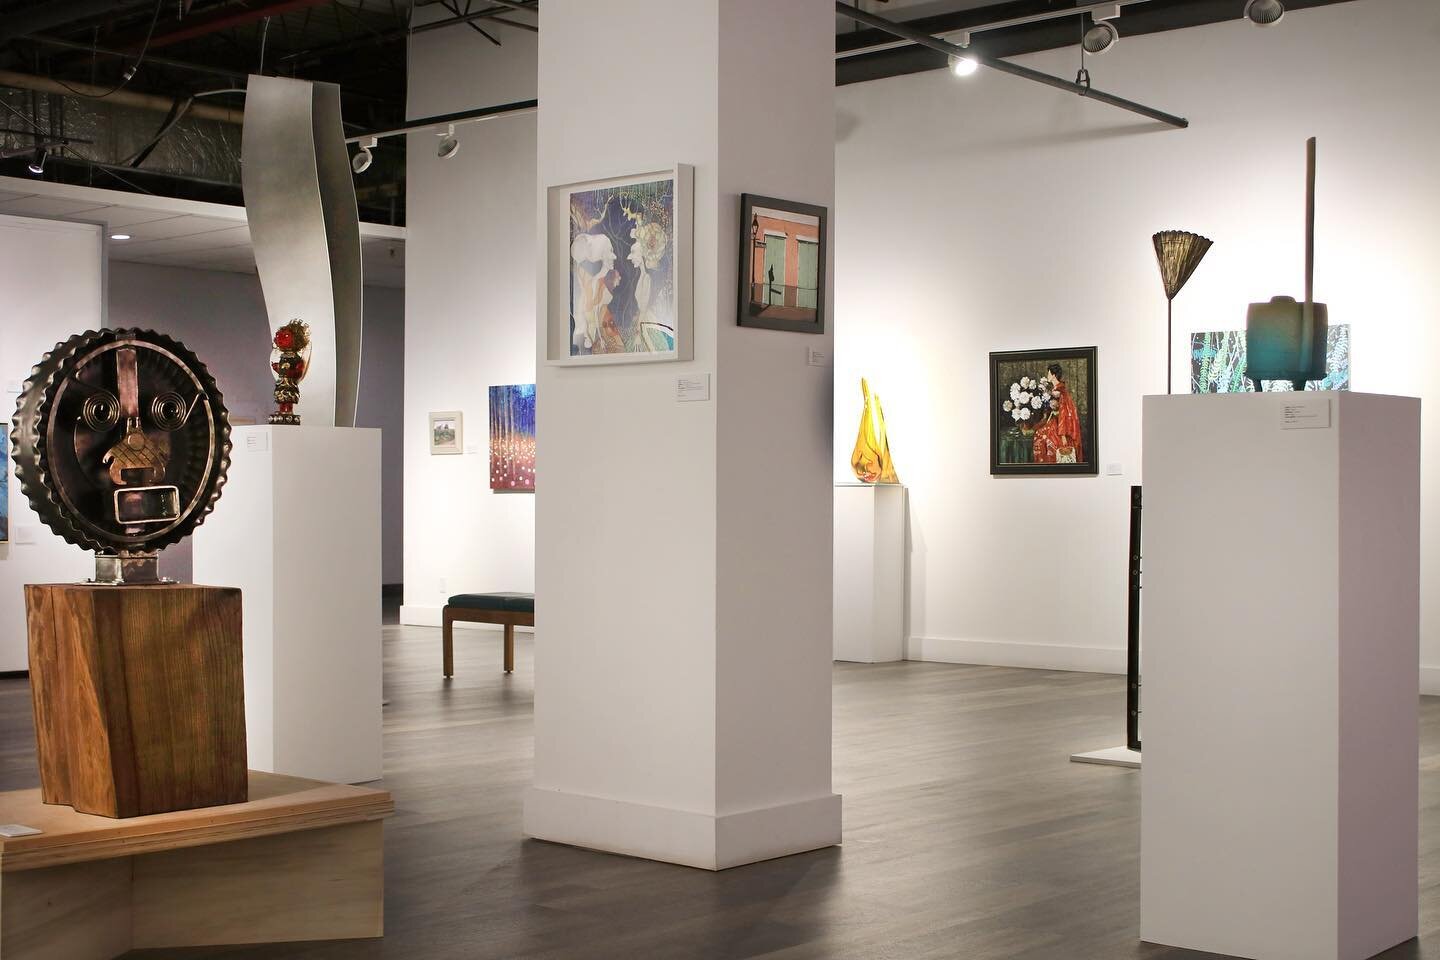 The One Piece Show had a crazy fun, packed house of an opening with many, many friends and artists on hand. It's also a remarkable show of local and national artists that's worth your time. The last day to see it is Monday, March 27.